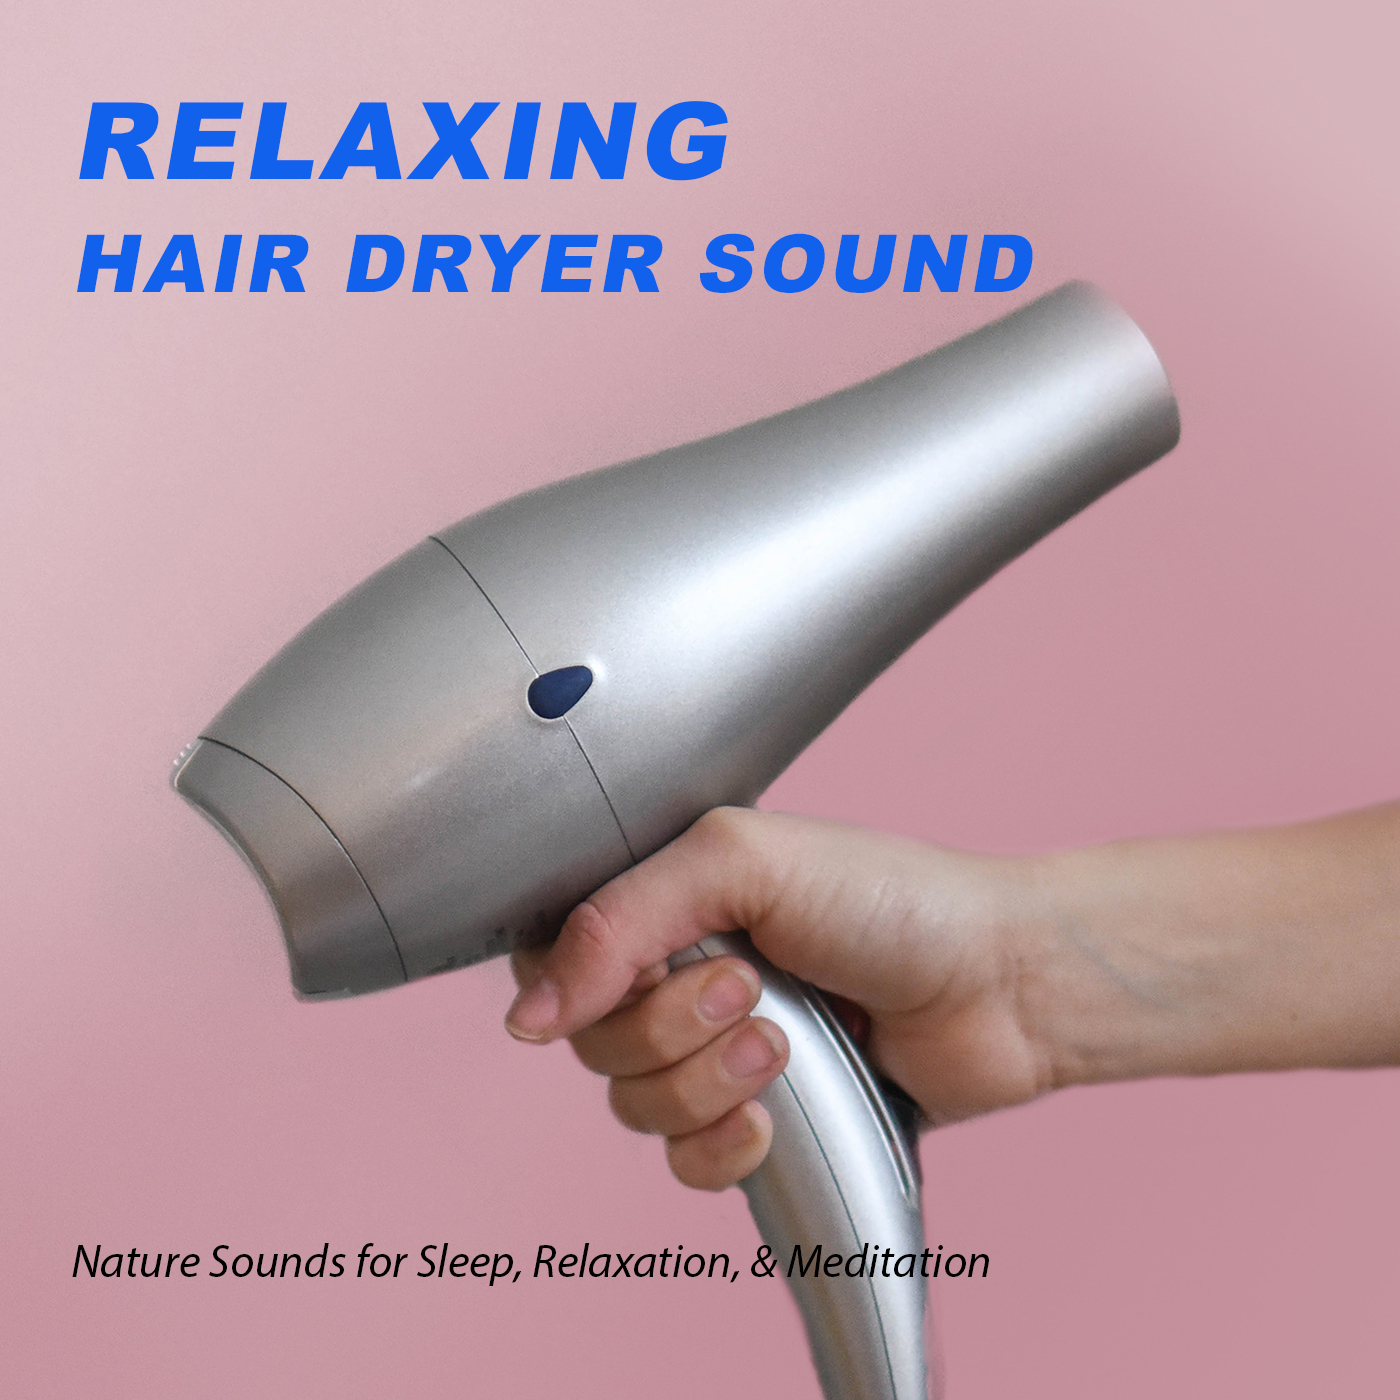 Relaxing Hair Dryer Sound - Nature Sounds for Relaxation, Meditation, Studying & Deep Sleep